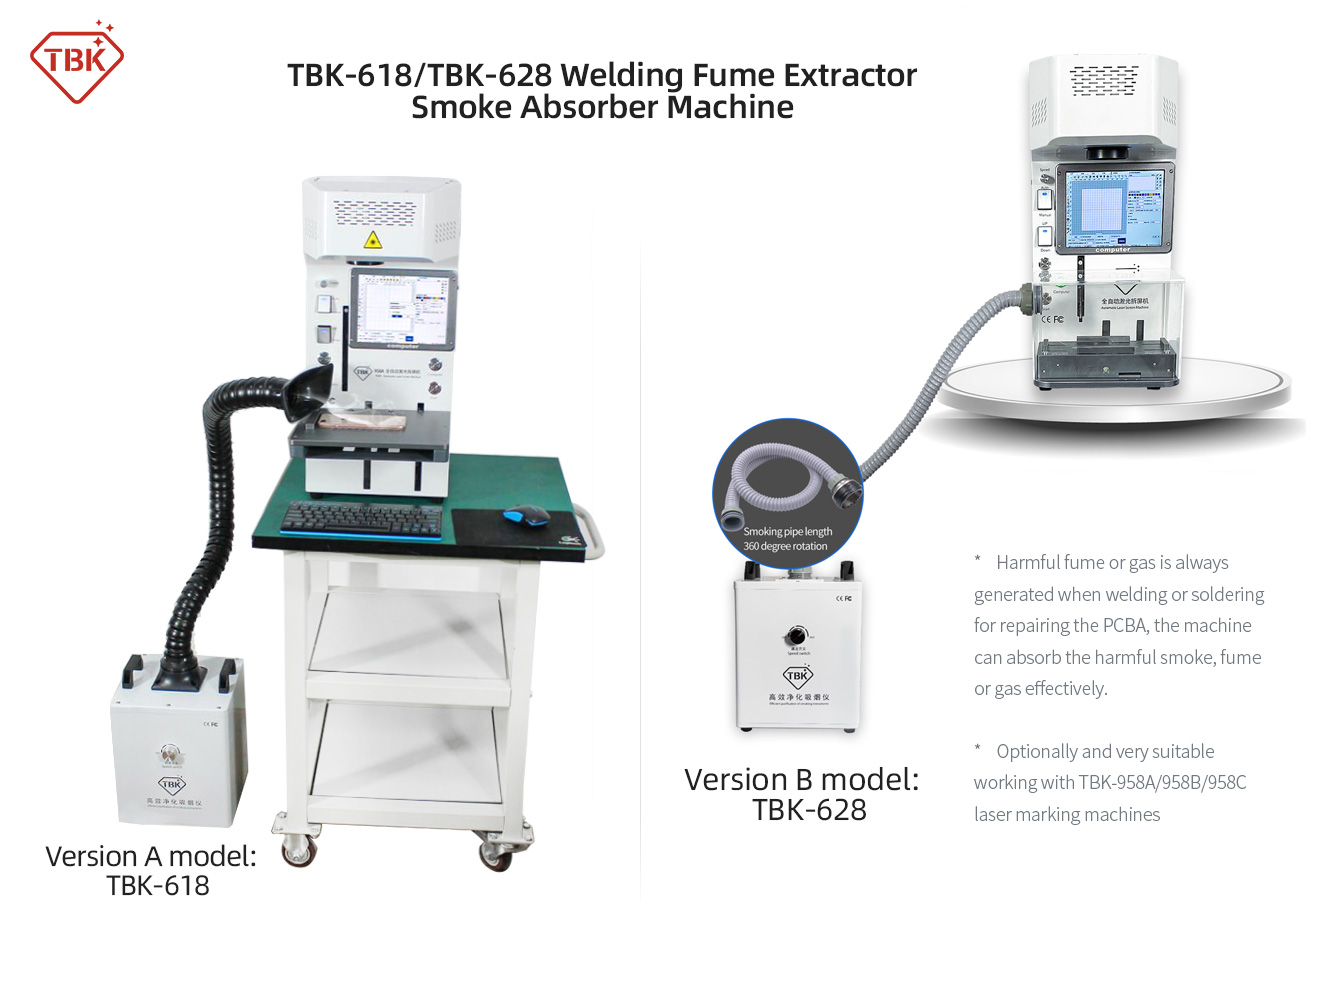 TBK-618 TBK-628 Welding Fume Extractor Smoke Absorber Machine Optional with Suction Box